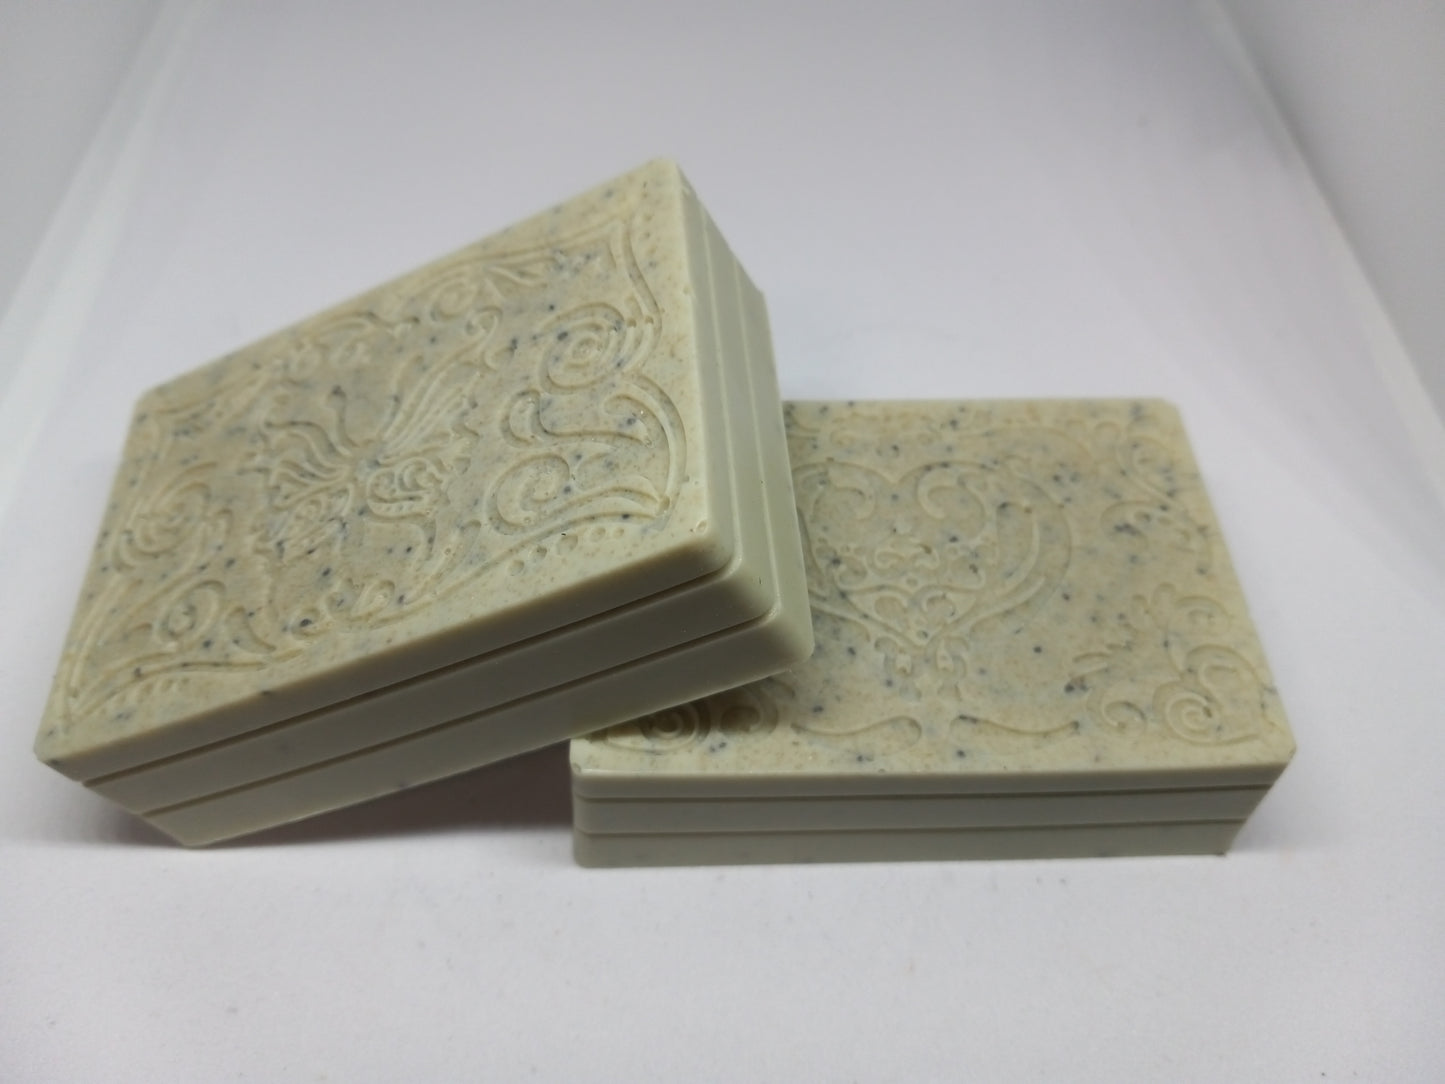 Tobacco and Bay Leaf - Hand Poured Exfoliating Oatmeal Soap